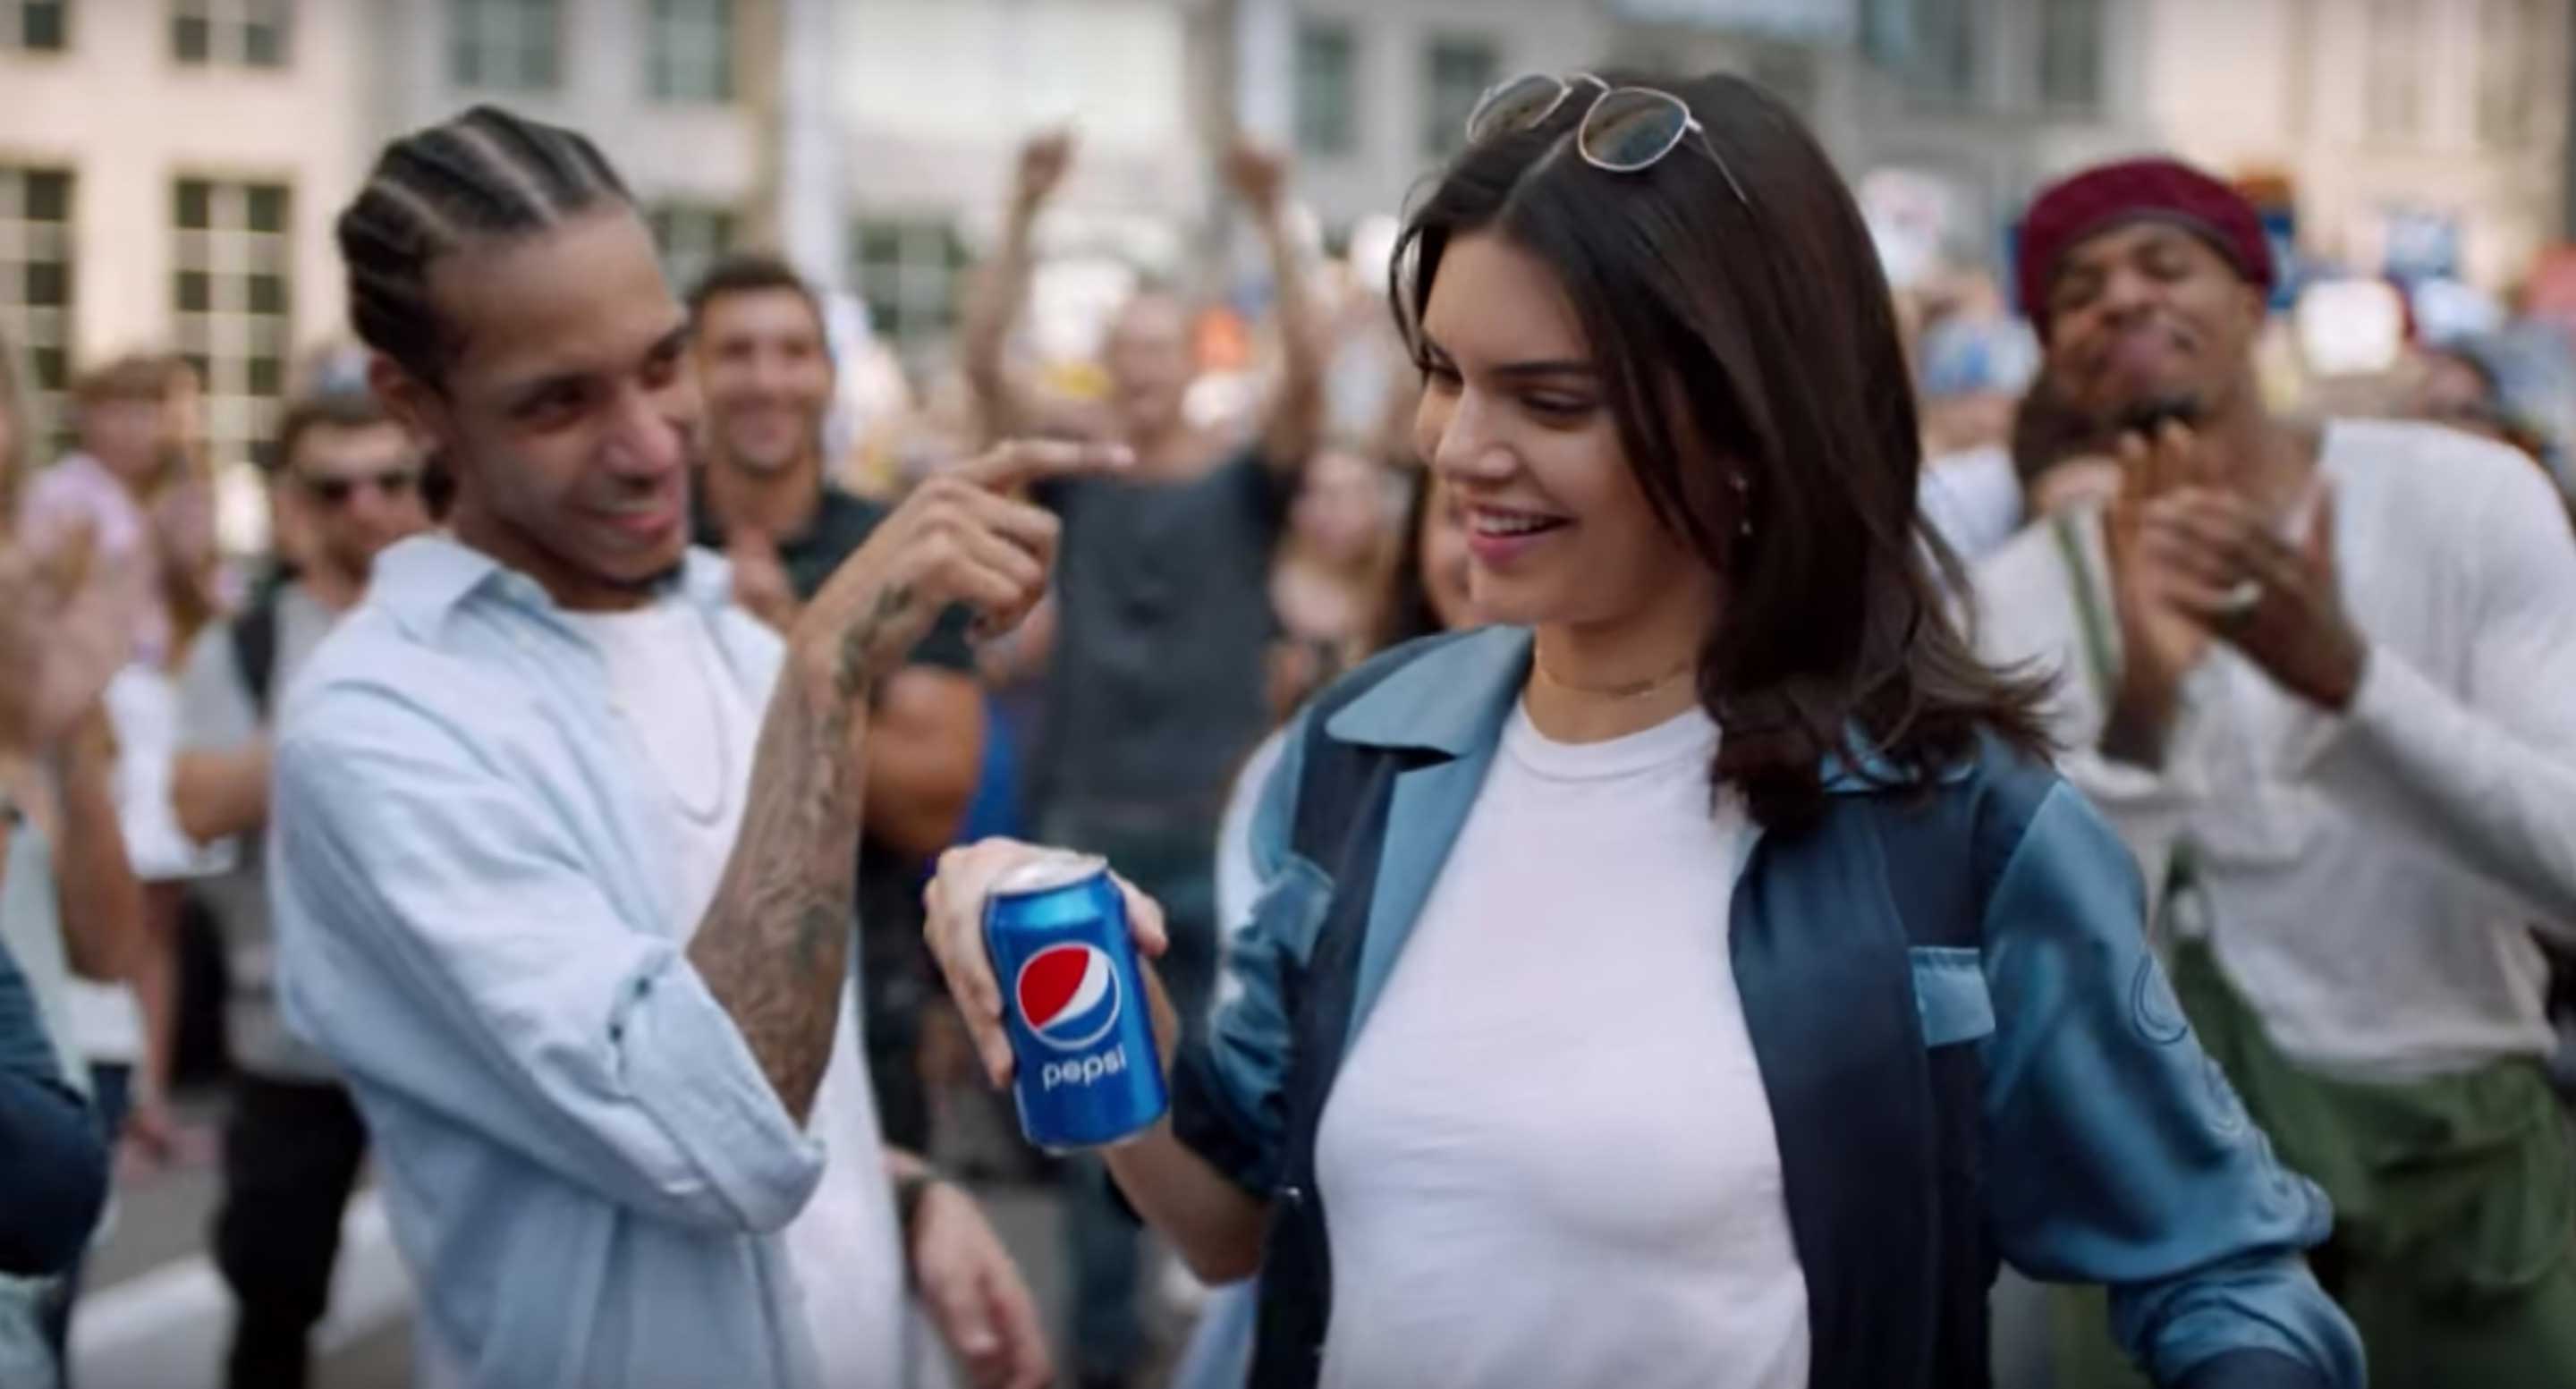 Kendall Jenner Pepsi Ad: Smart Company Branding Move or a Flop?